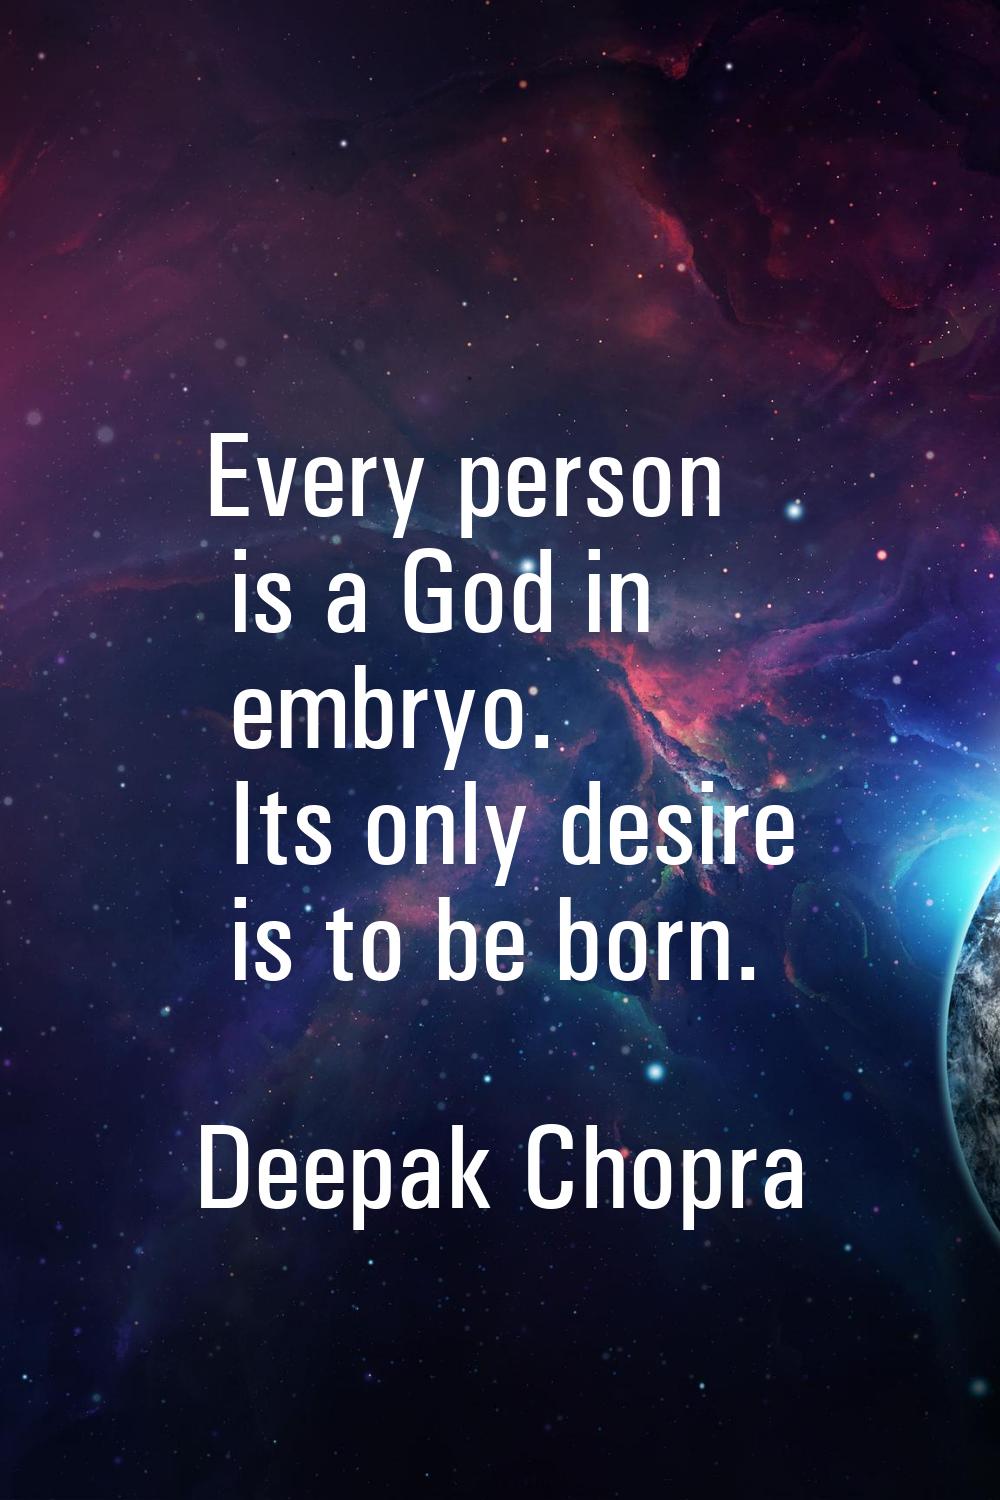 Every person is a God in embryo. Its only desire is to be born.